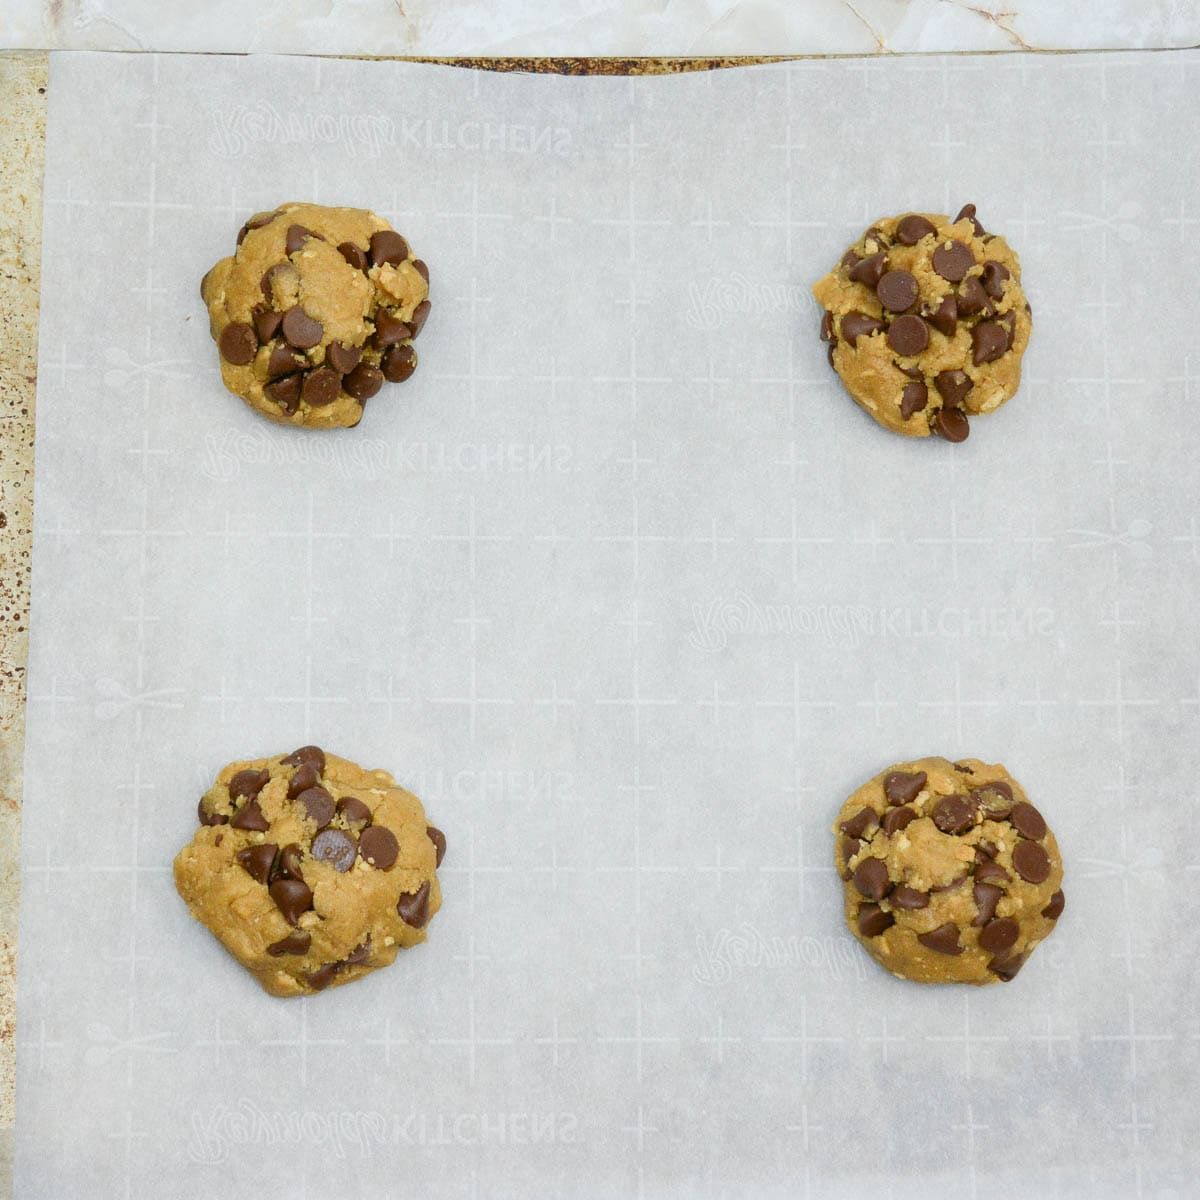 Four chocolate chip cookies on a baking sheet.